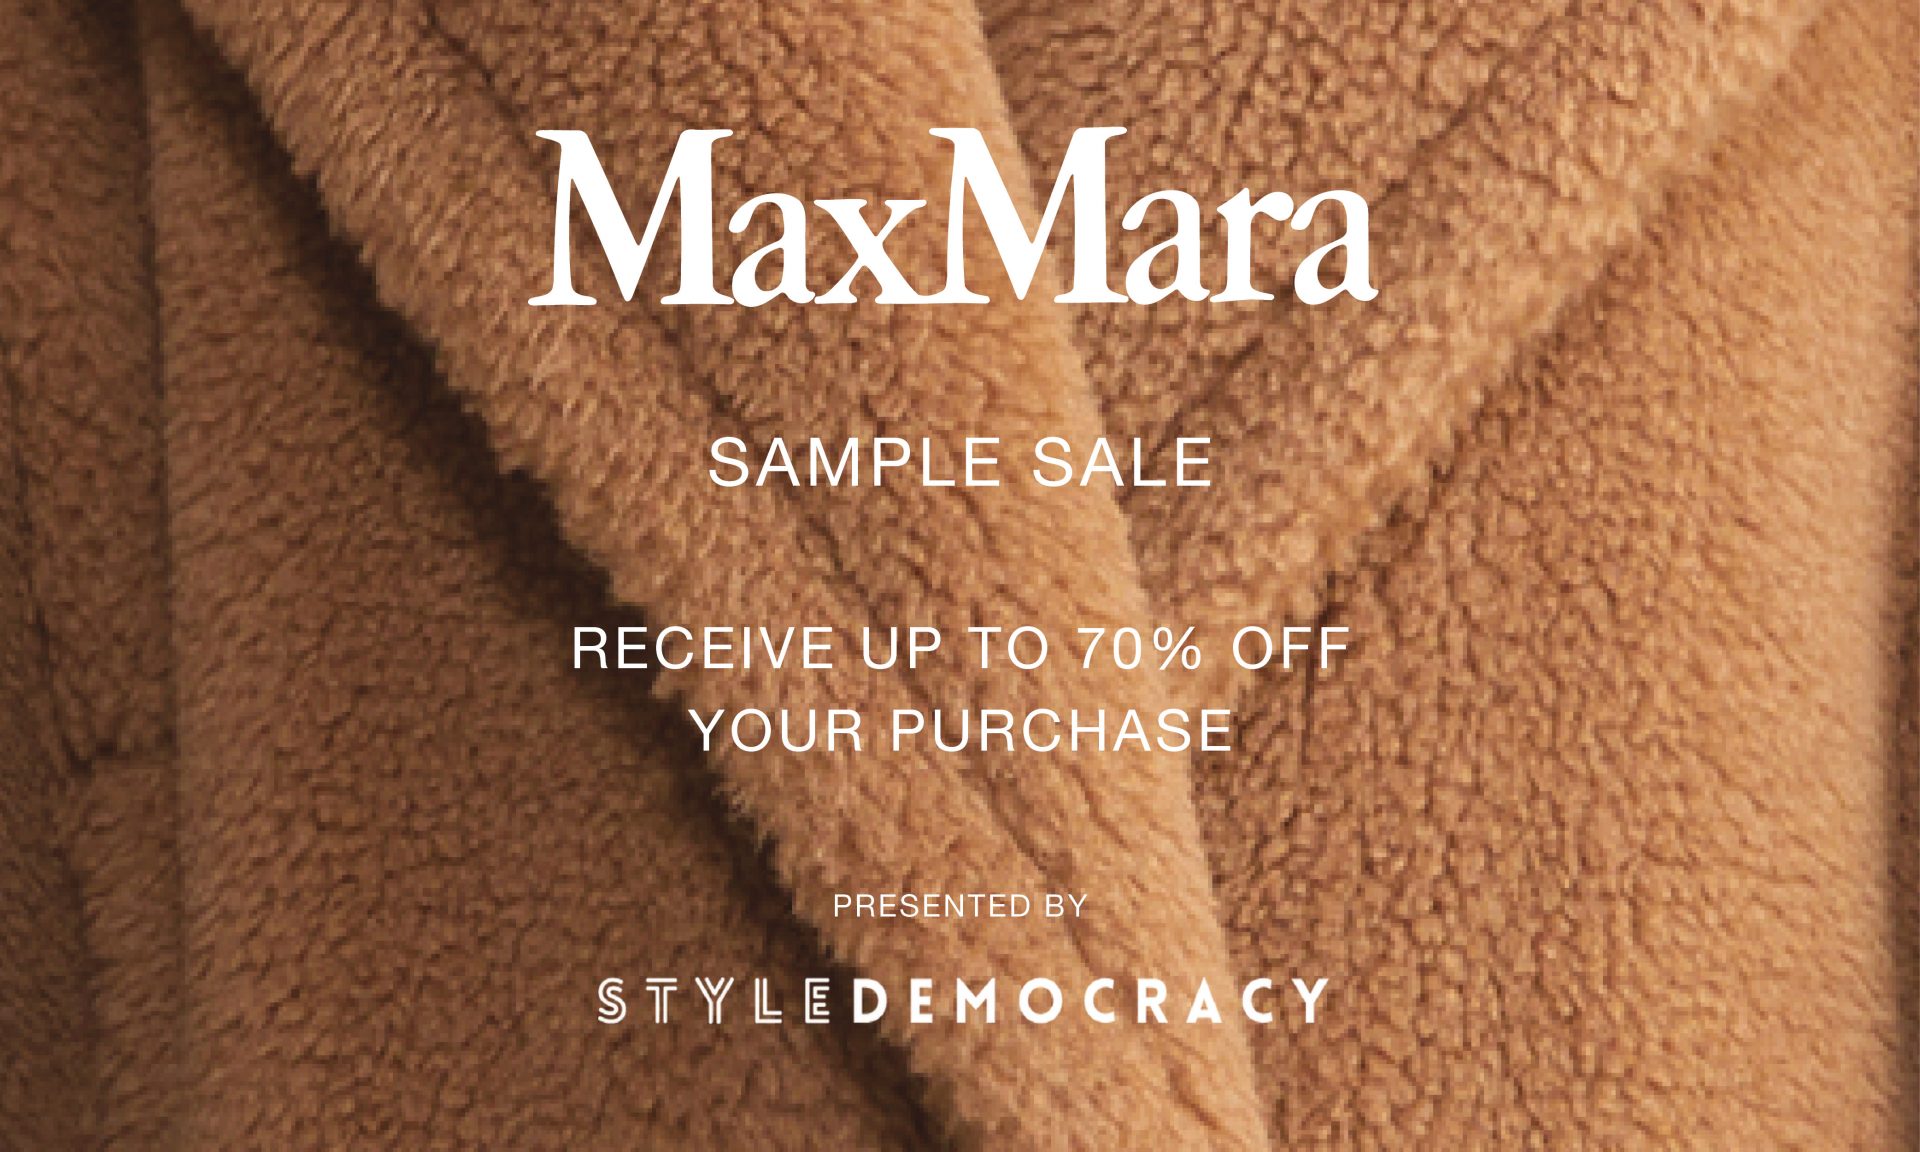 The Max Mara Sample Sale Presented By StyleDemocracy